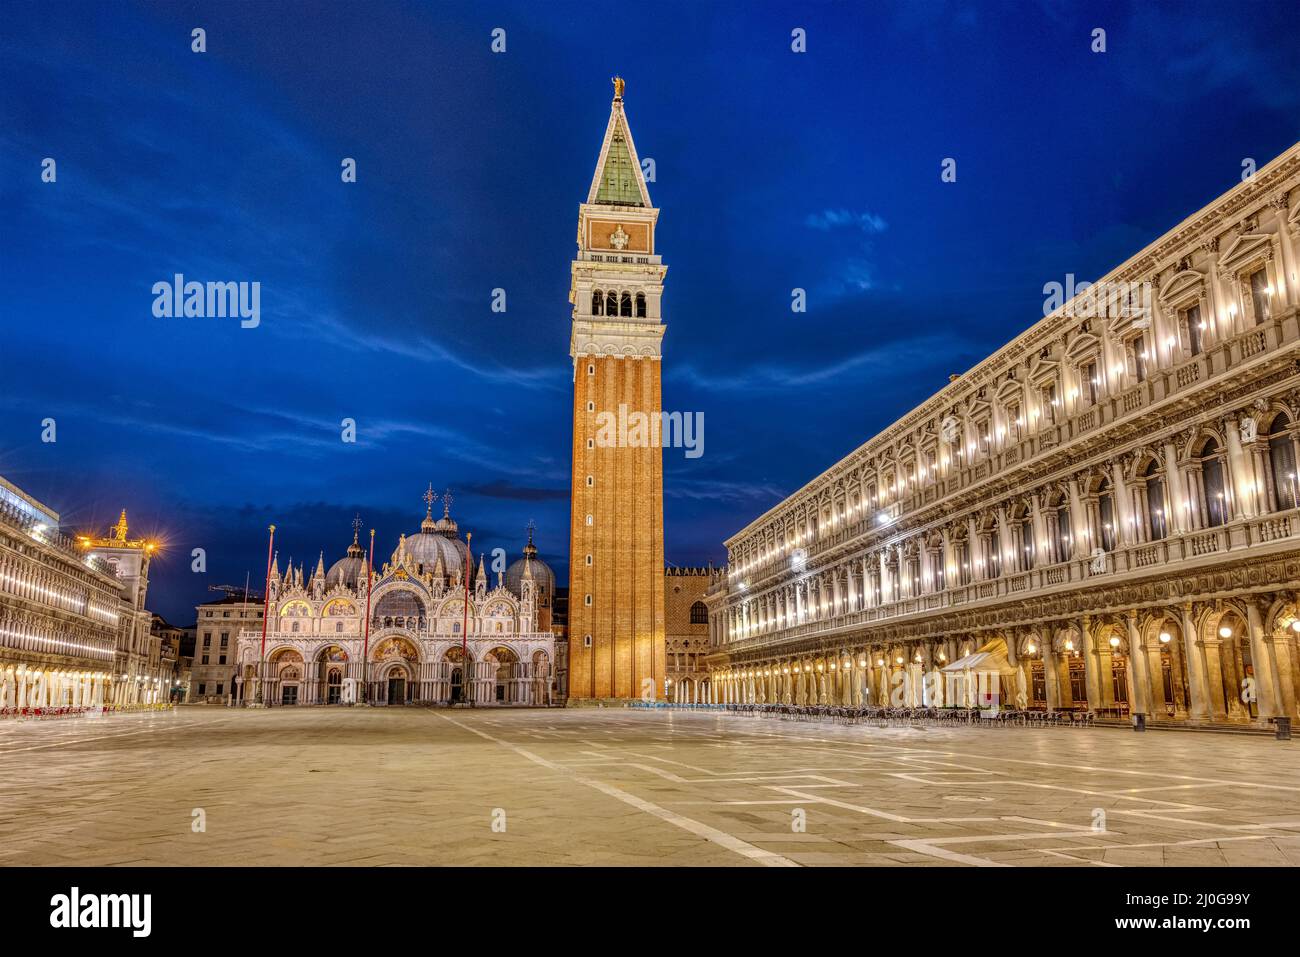 The famous Piazza San Marco in Venice with the bell tower and the cathedral at night Stock Photo